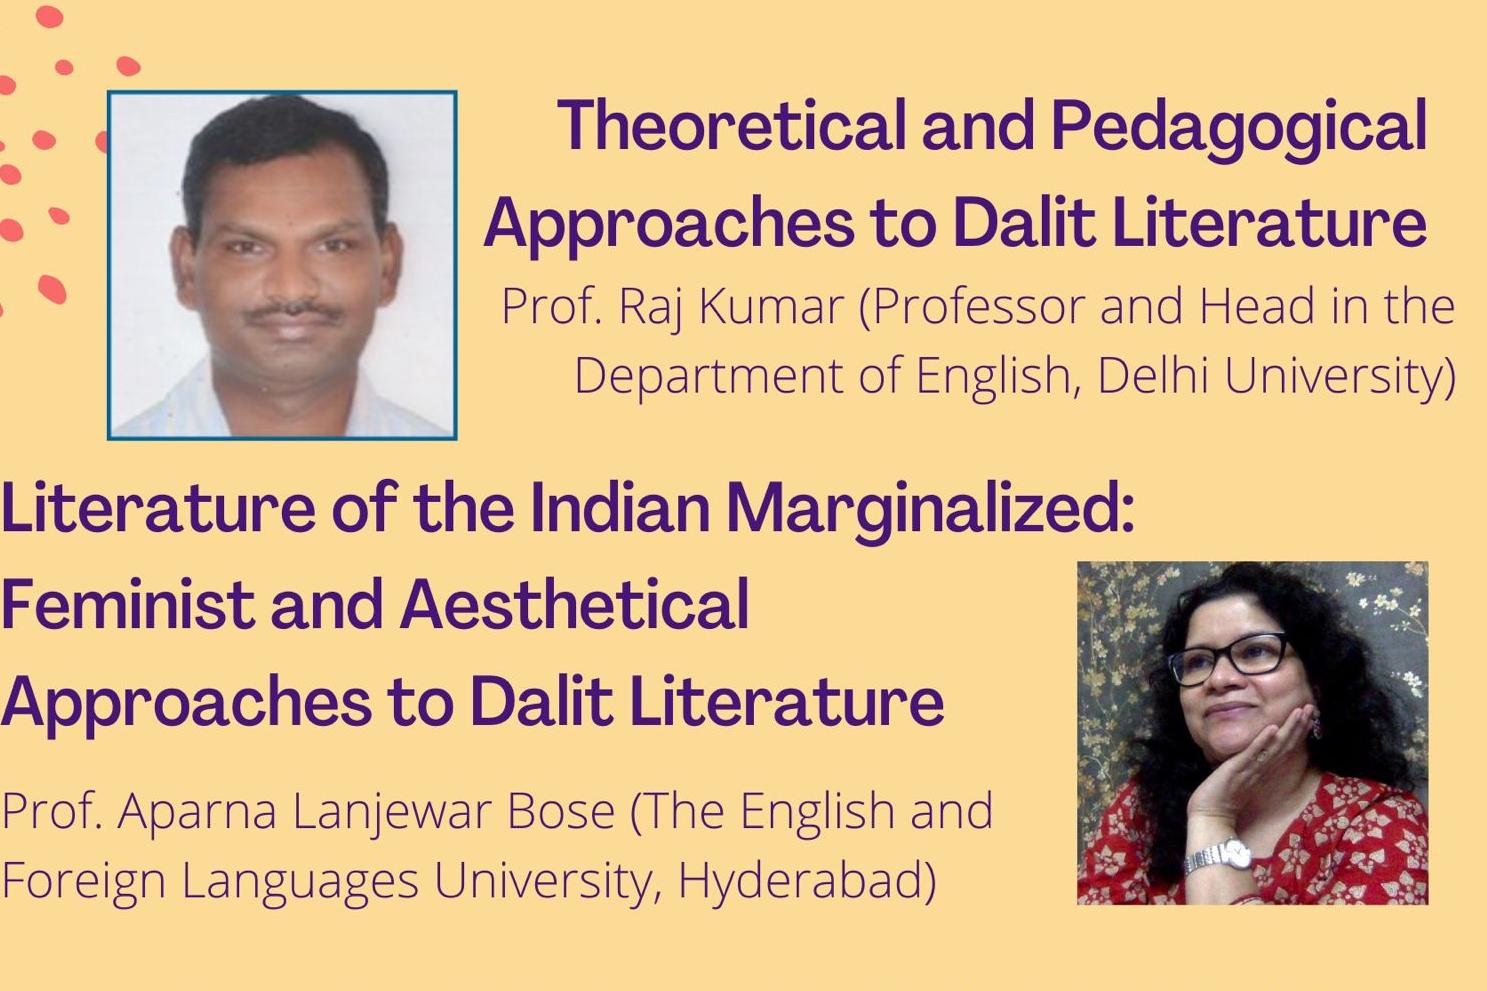 Indian Literature of Marginalized Society Guest Speakers